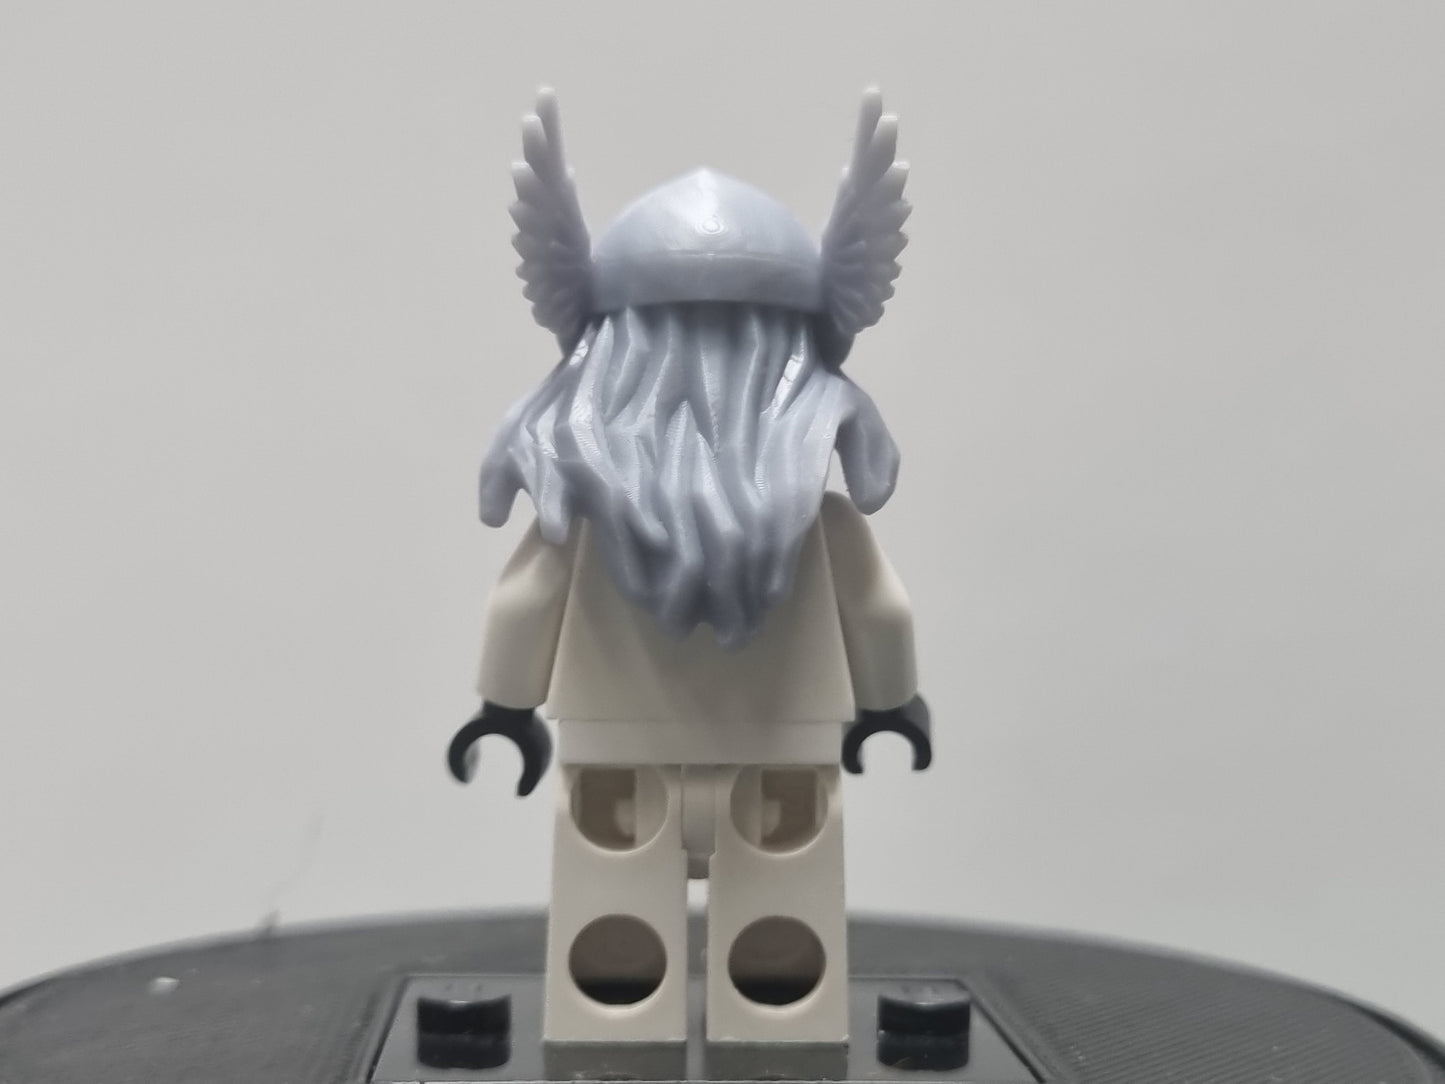 Building toy custom 3D printed Norse god heads and hairs!